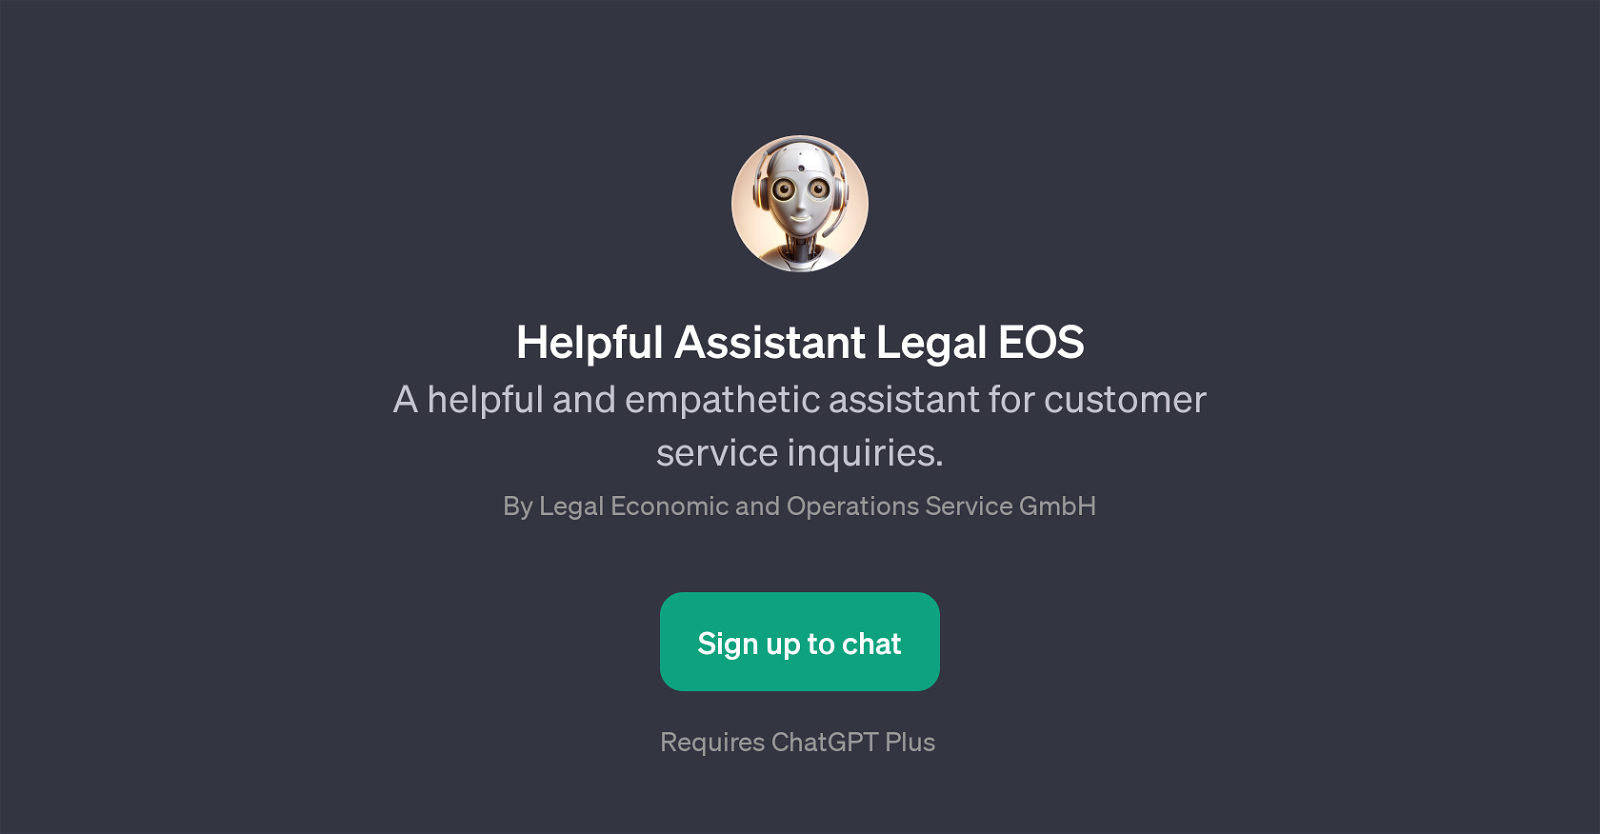 Helpful Assistant Legal EOS website